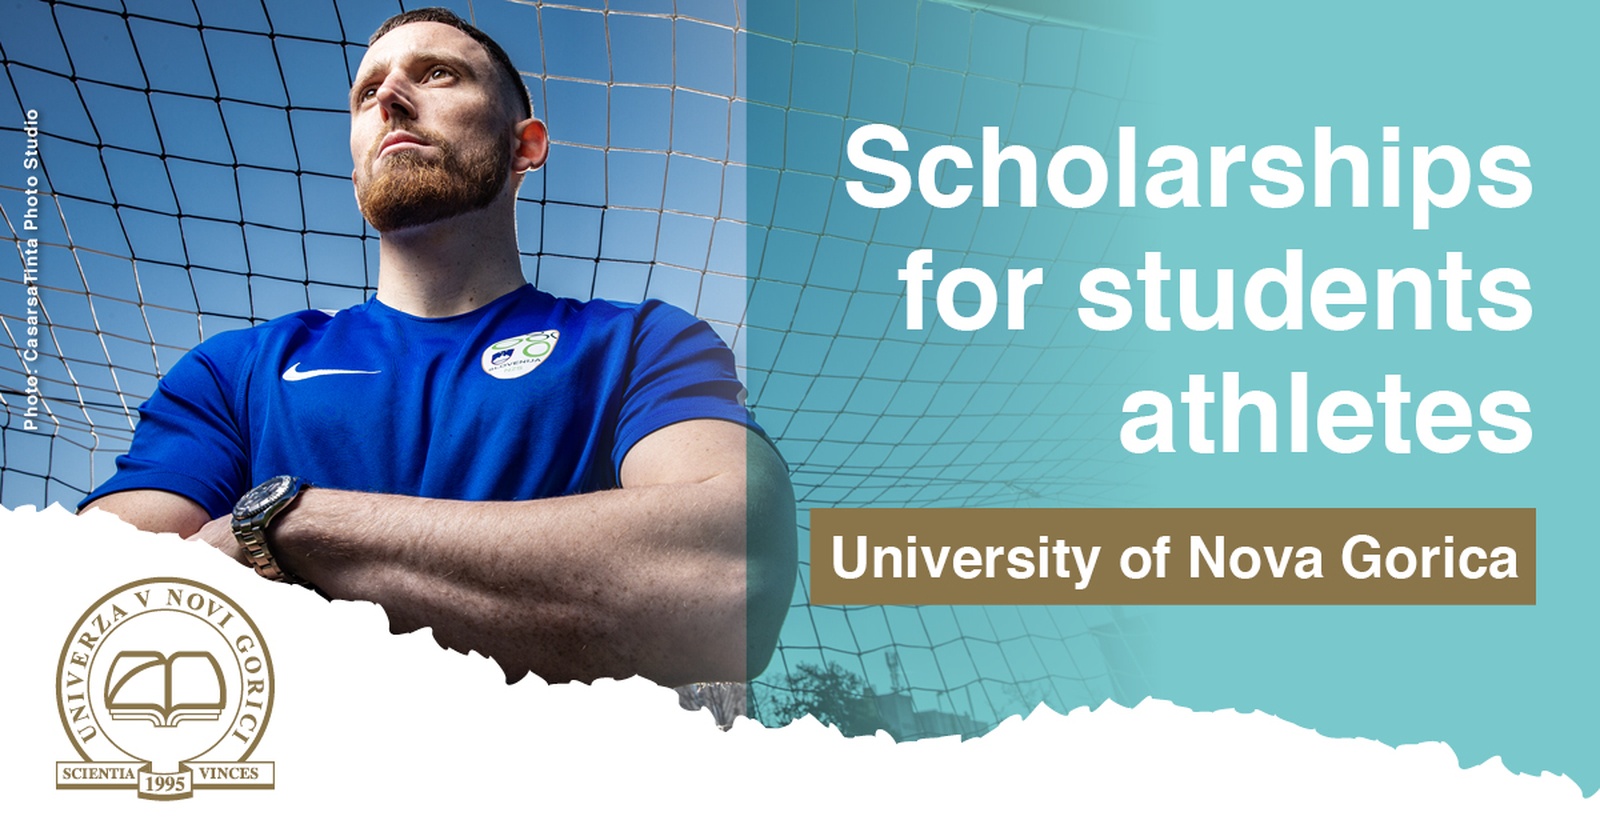 CALL FOR APPLICATIONS for the scholarships of the Matija Franko Scholarship Fund for Students Athletes